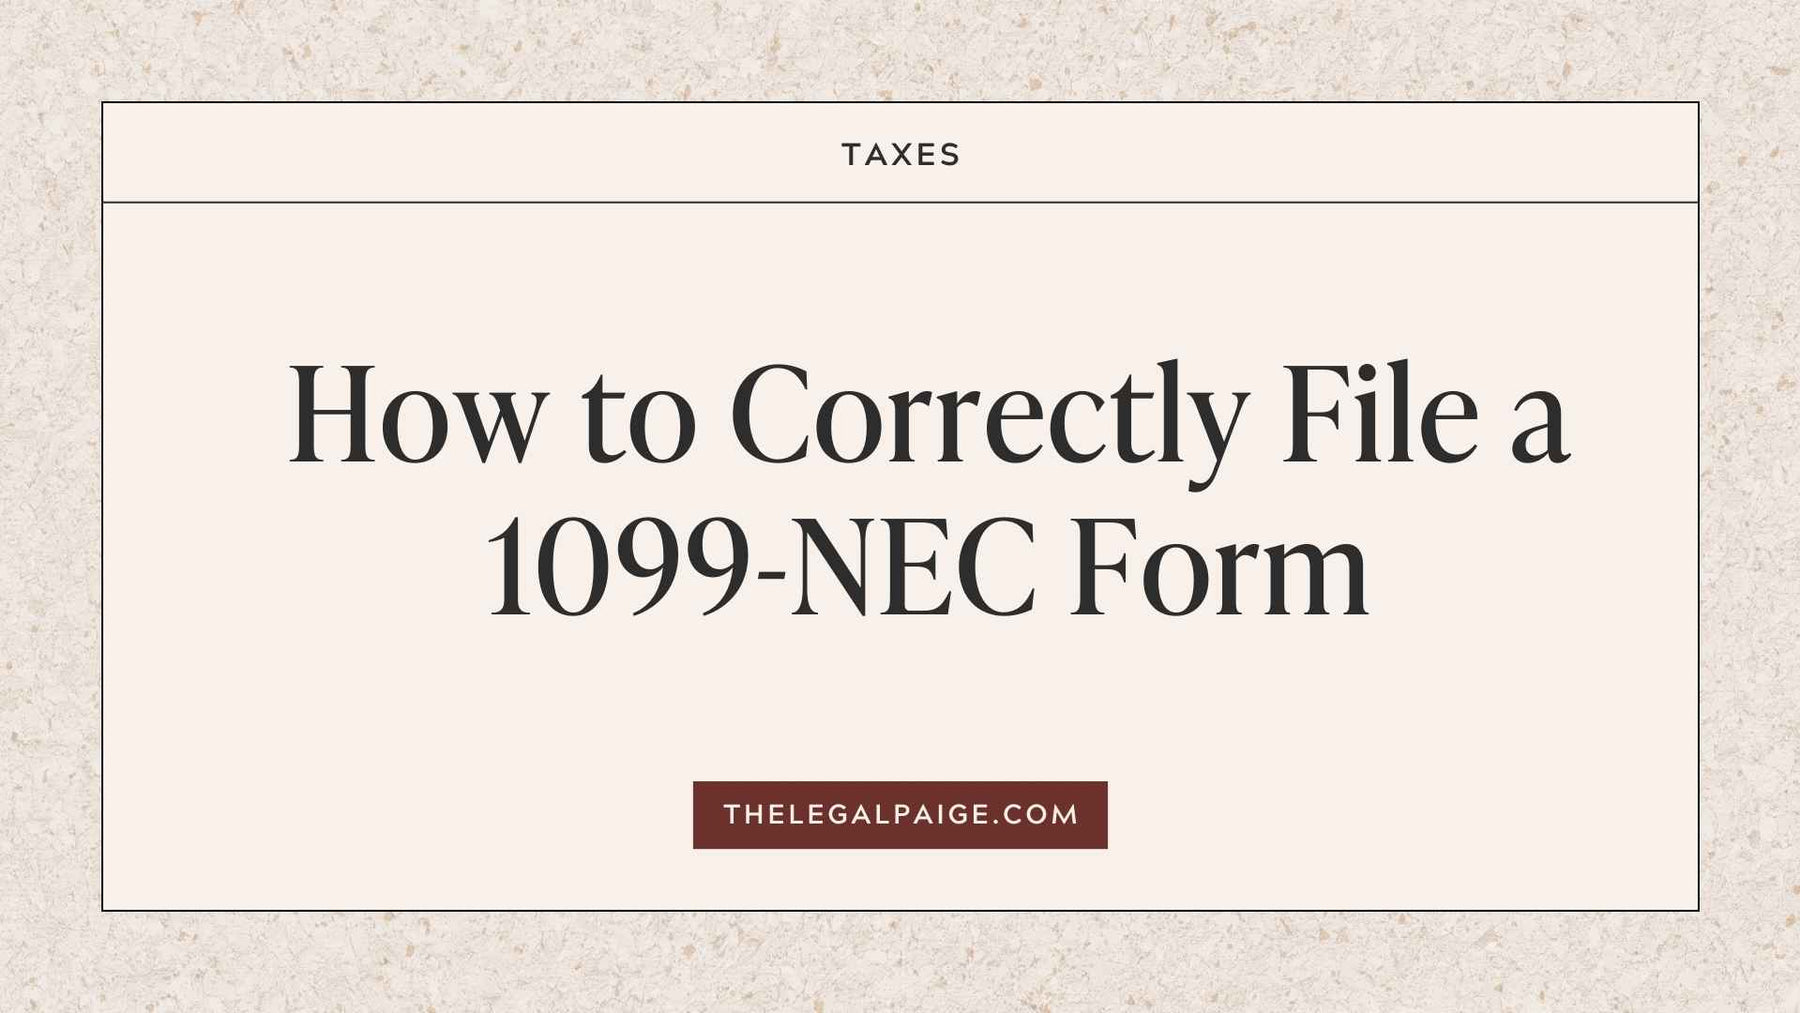 How to Correctly File a 1099-NEC Form